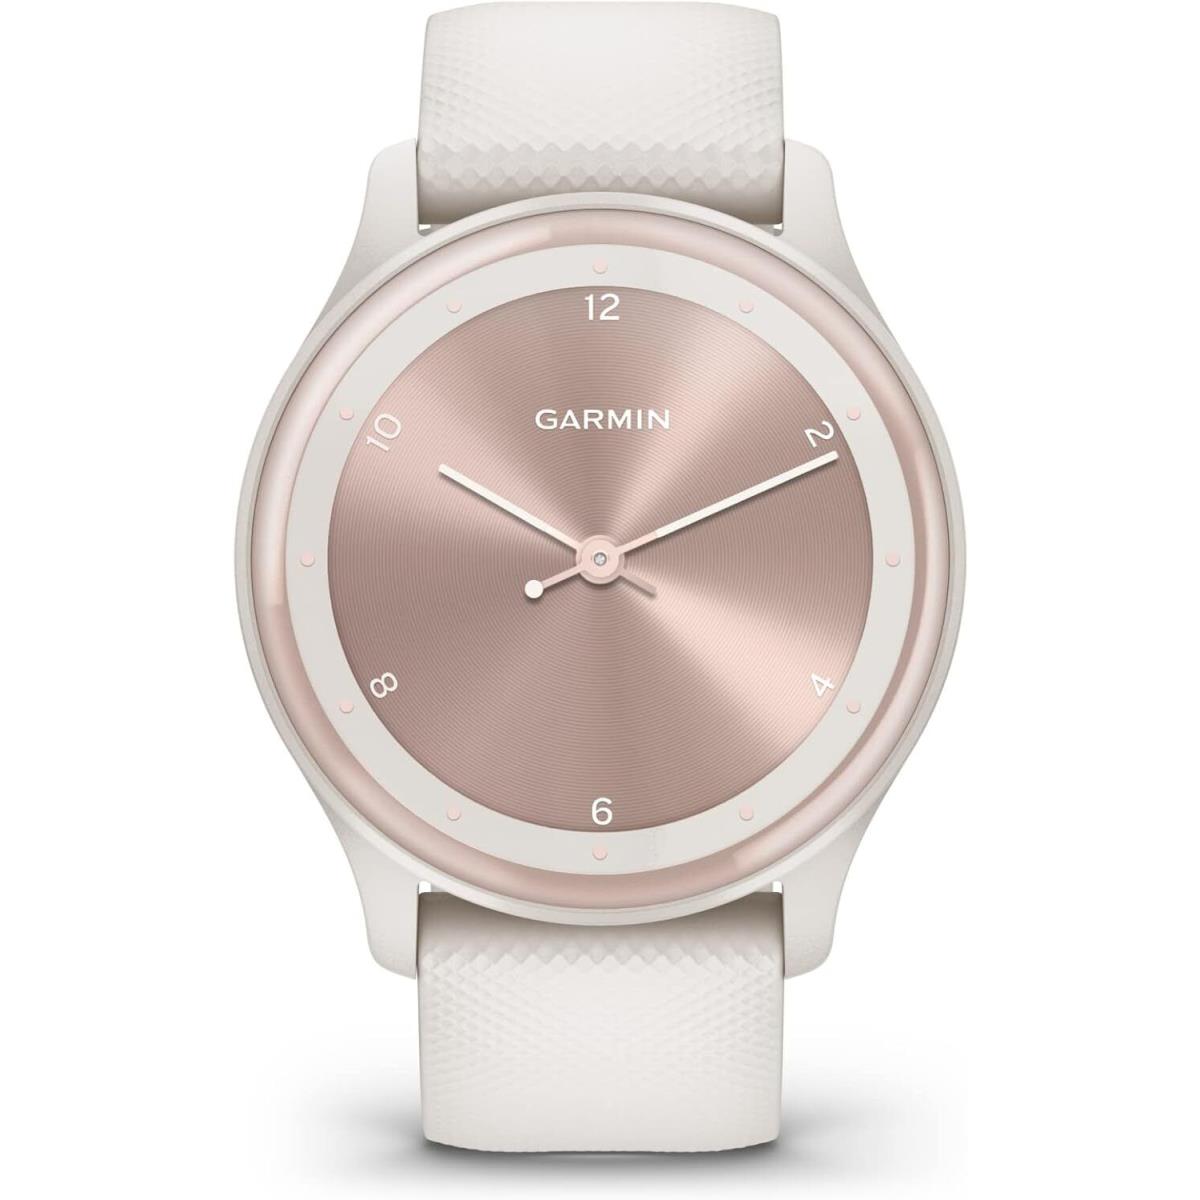 Garmin Vivomove Sport Hybrid Smartwatch with Analog Hands Track Your Health Ivory with Peach Gold Accents